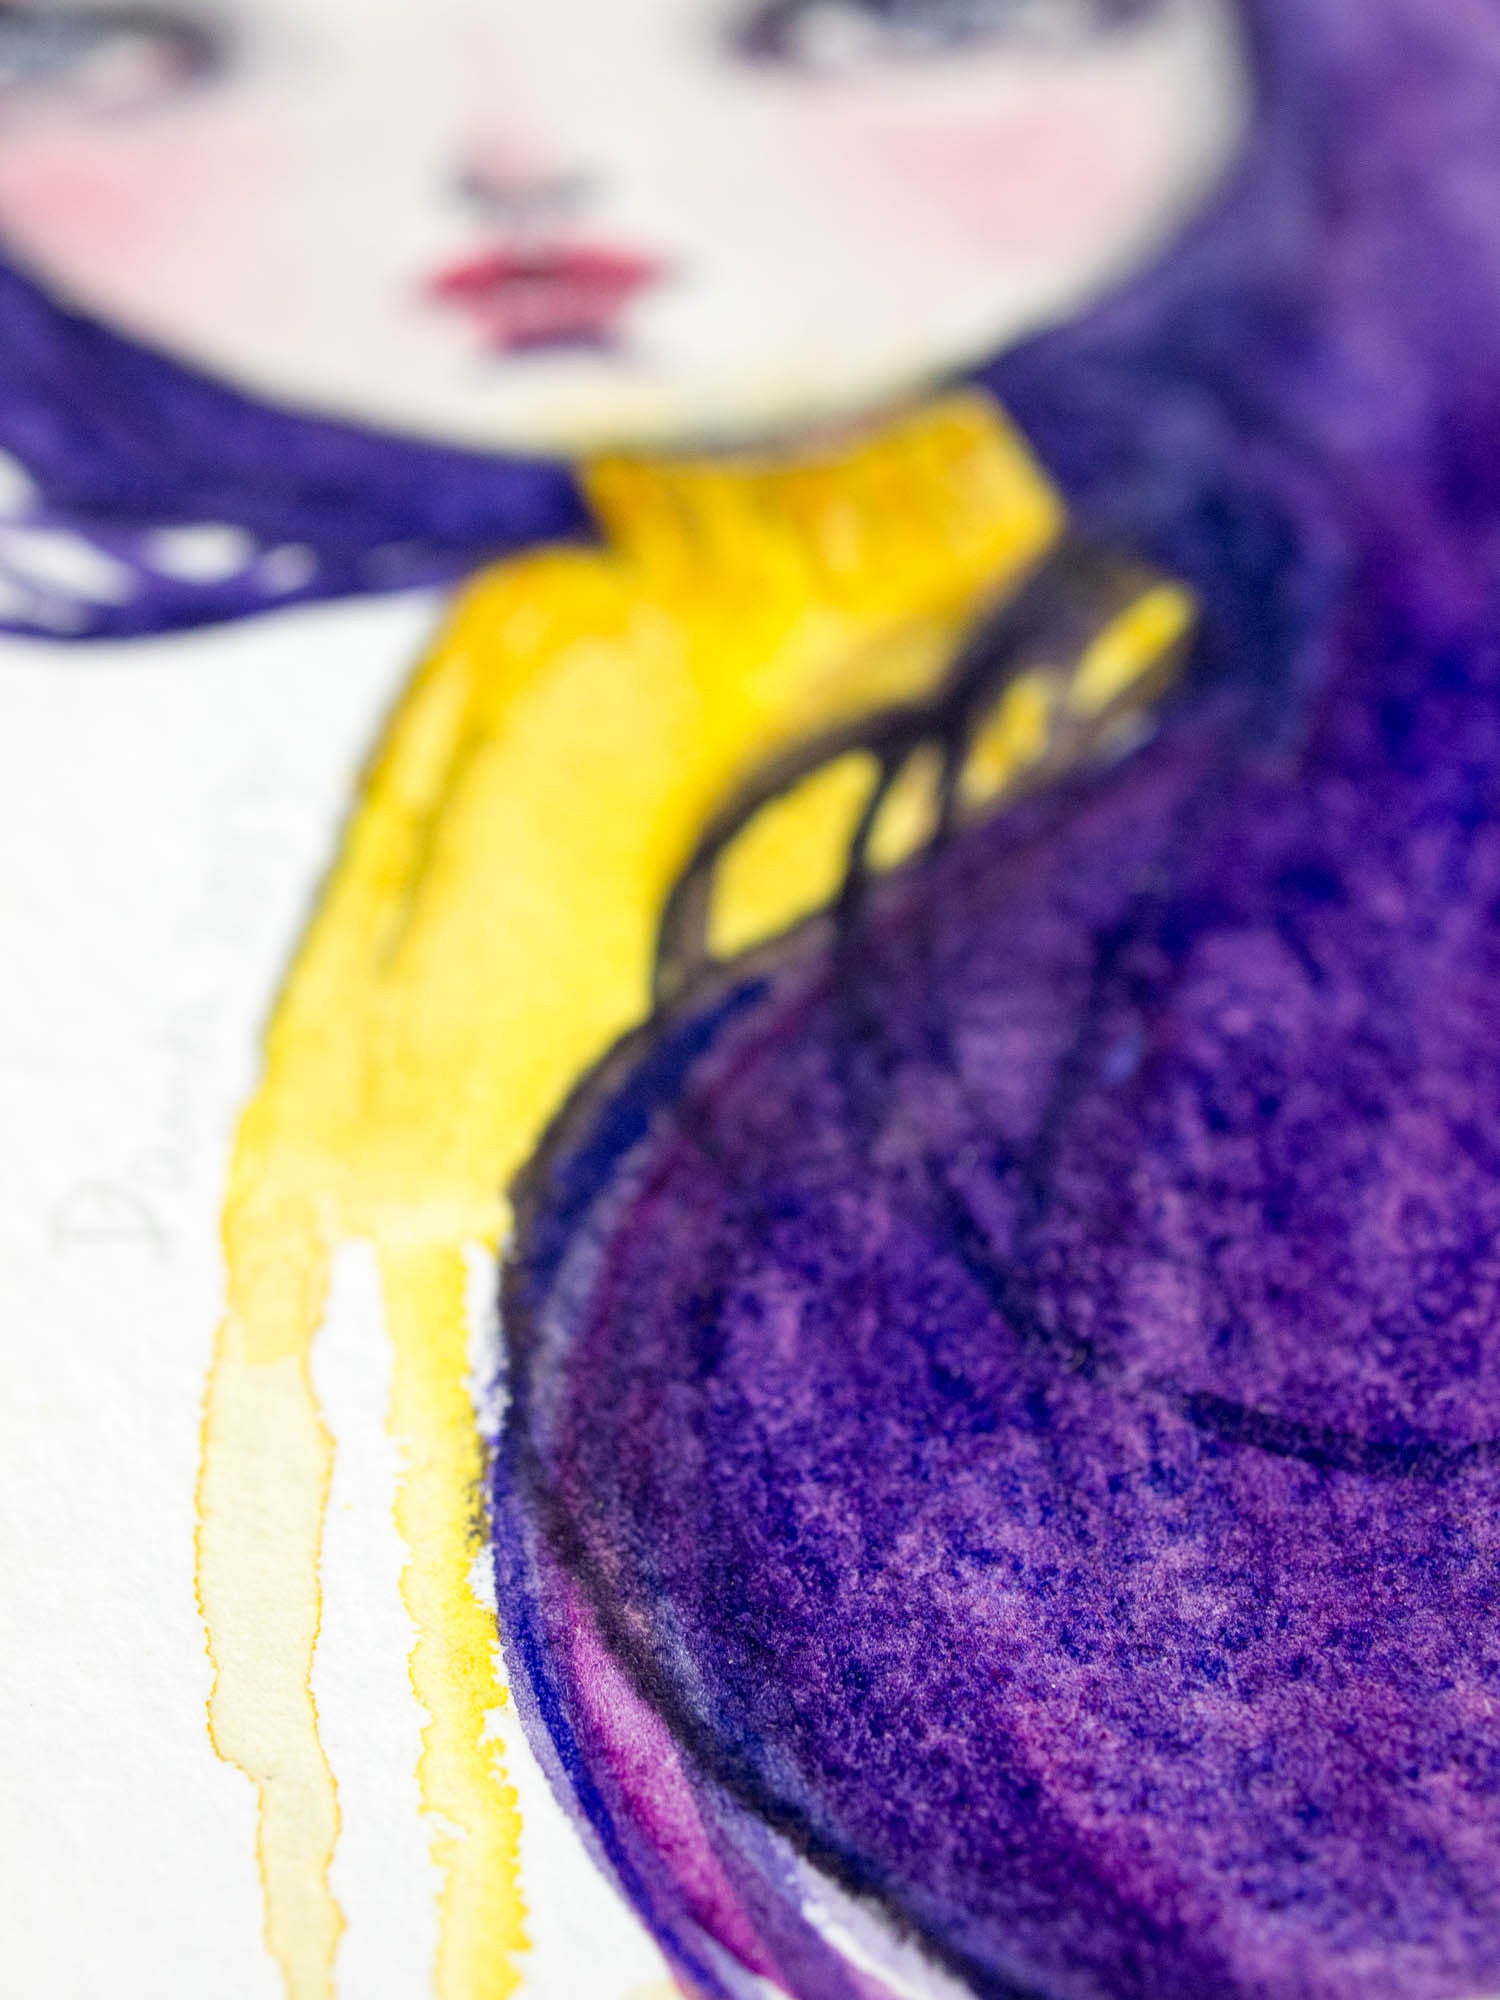 A beautiful surreal girl with purple hair materialized on Danita's latest watercolor painting art.